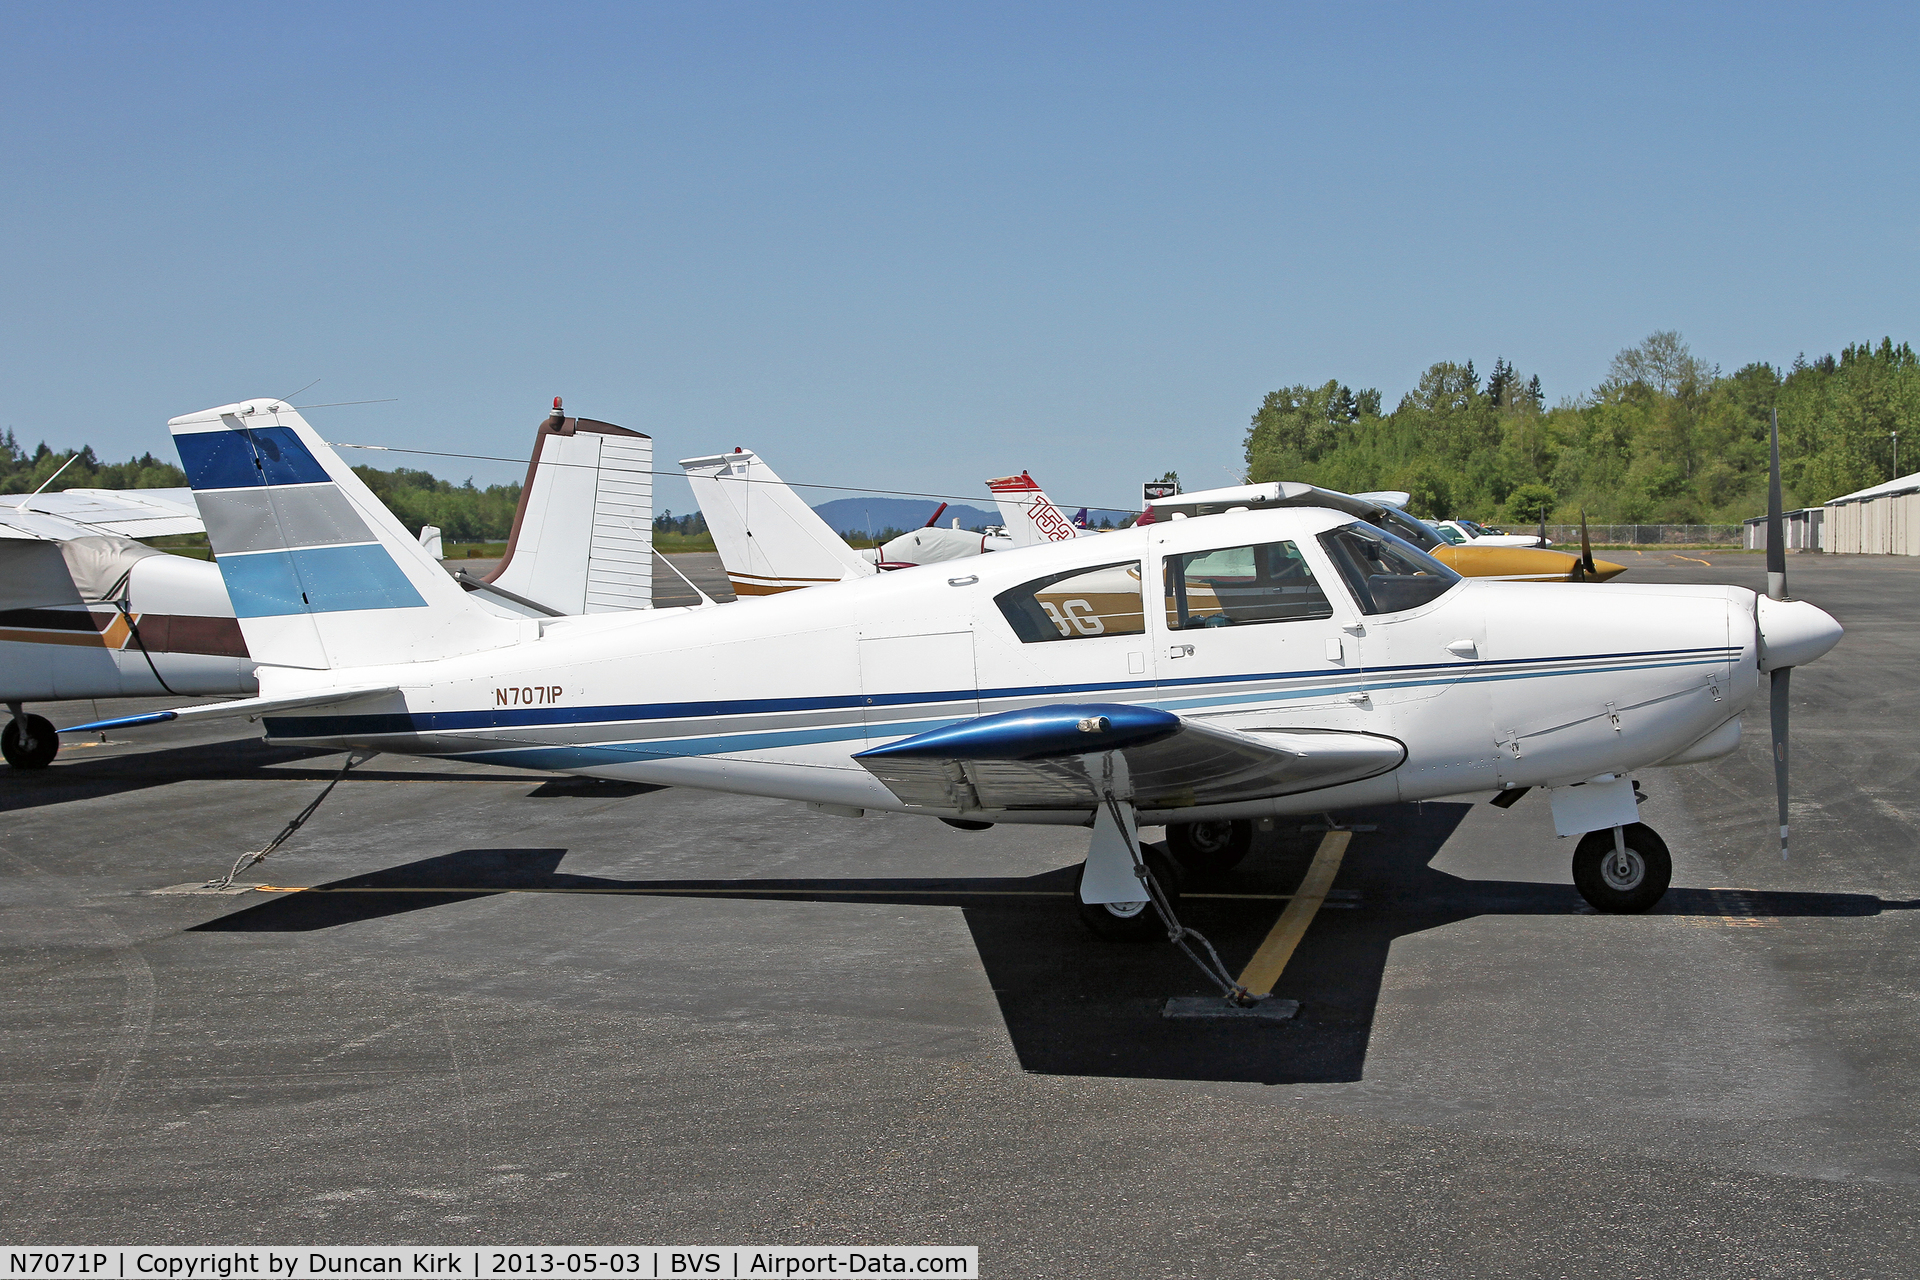 N7071P, 1960 Piper PA-24-250 Comanche C/N 24-2223, Spotted at Skagit County